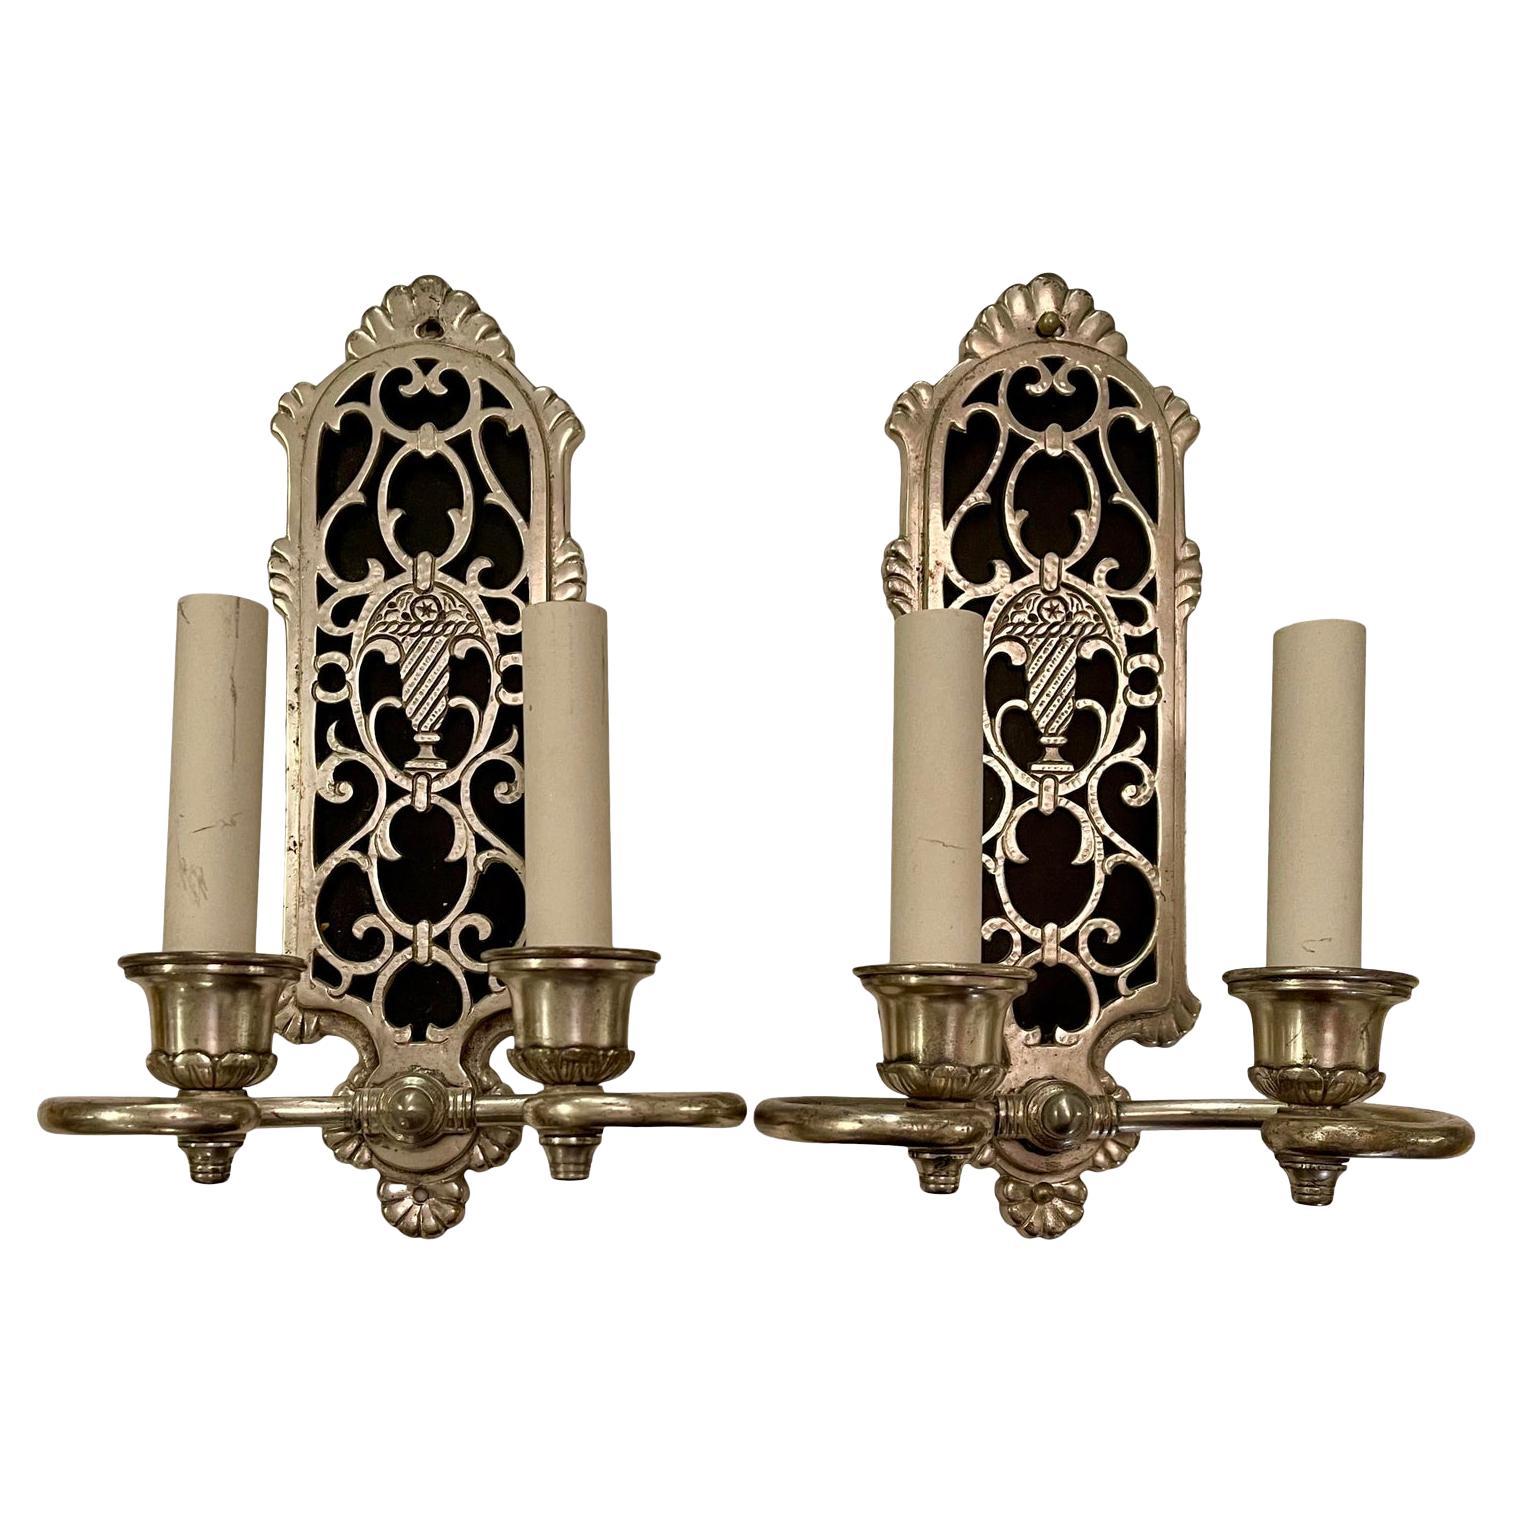 Pair of Art Deco Style Remains Lighting Silver Wall Light Sconce